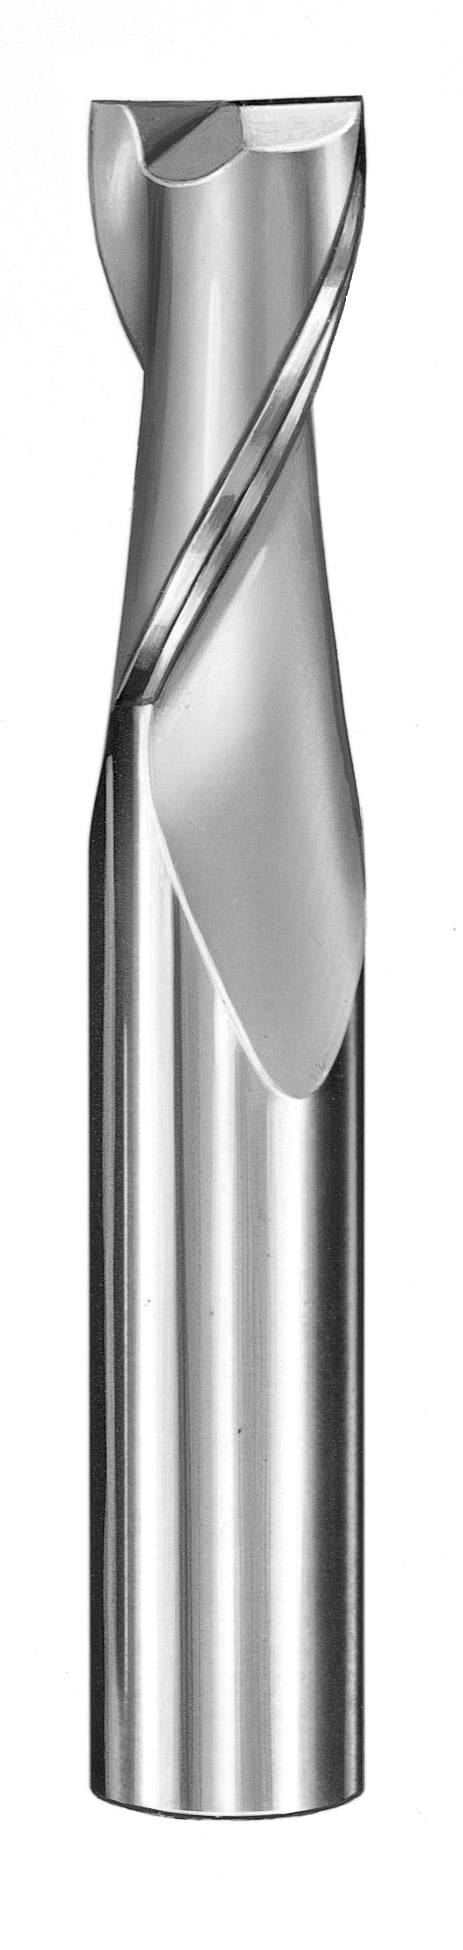 3/16" Dia, 2 Flute, Square End End Mill - 30323